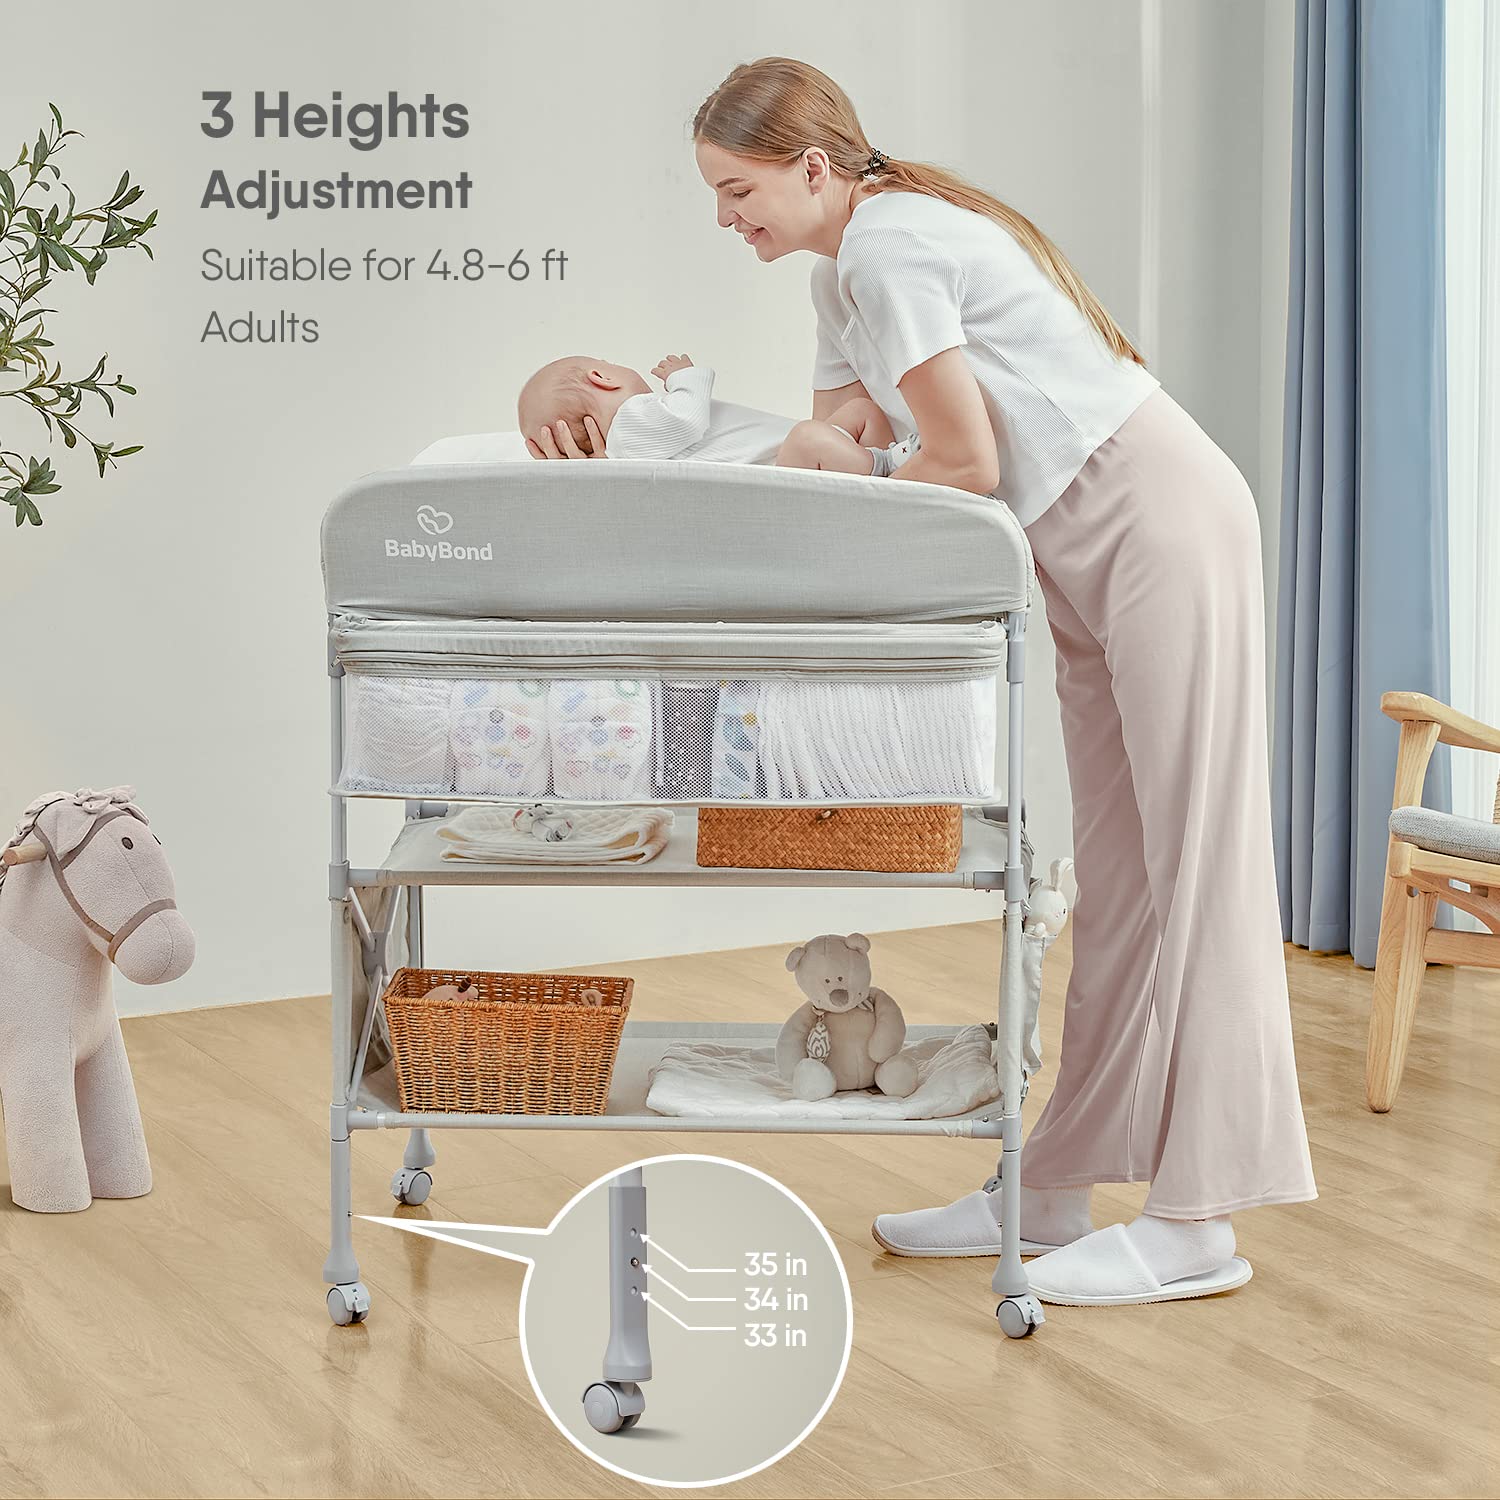 BabyBond Portable Baby Changing Table for Infant and Newborn